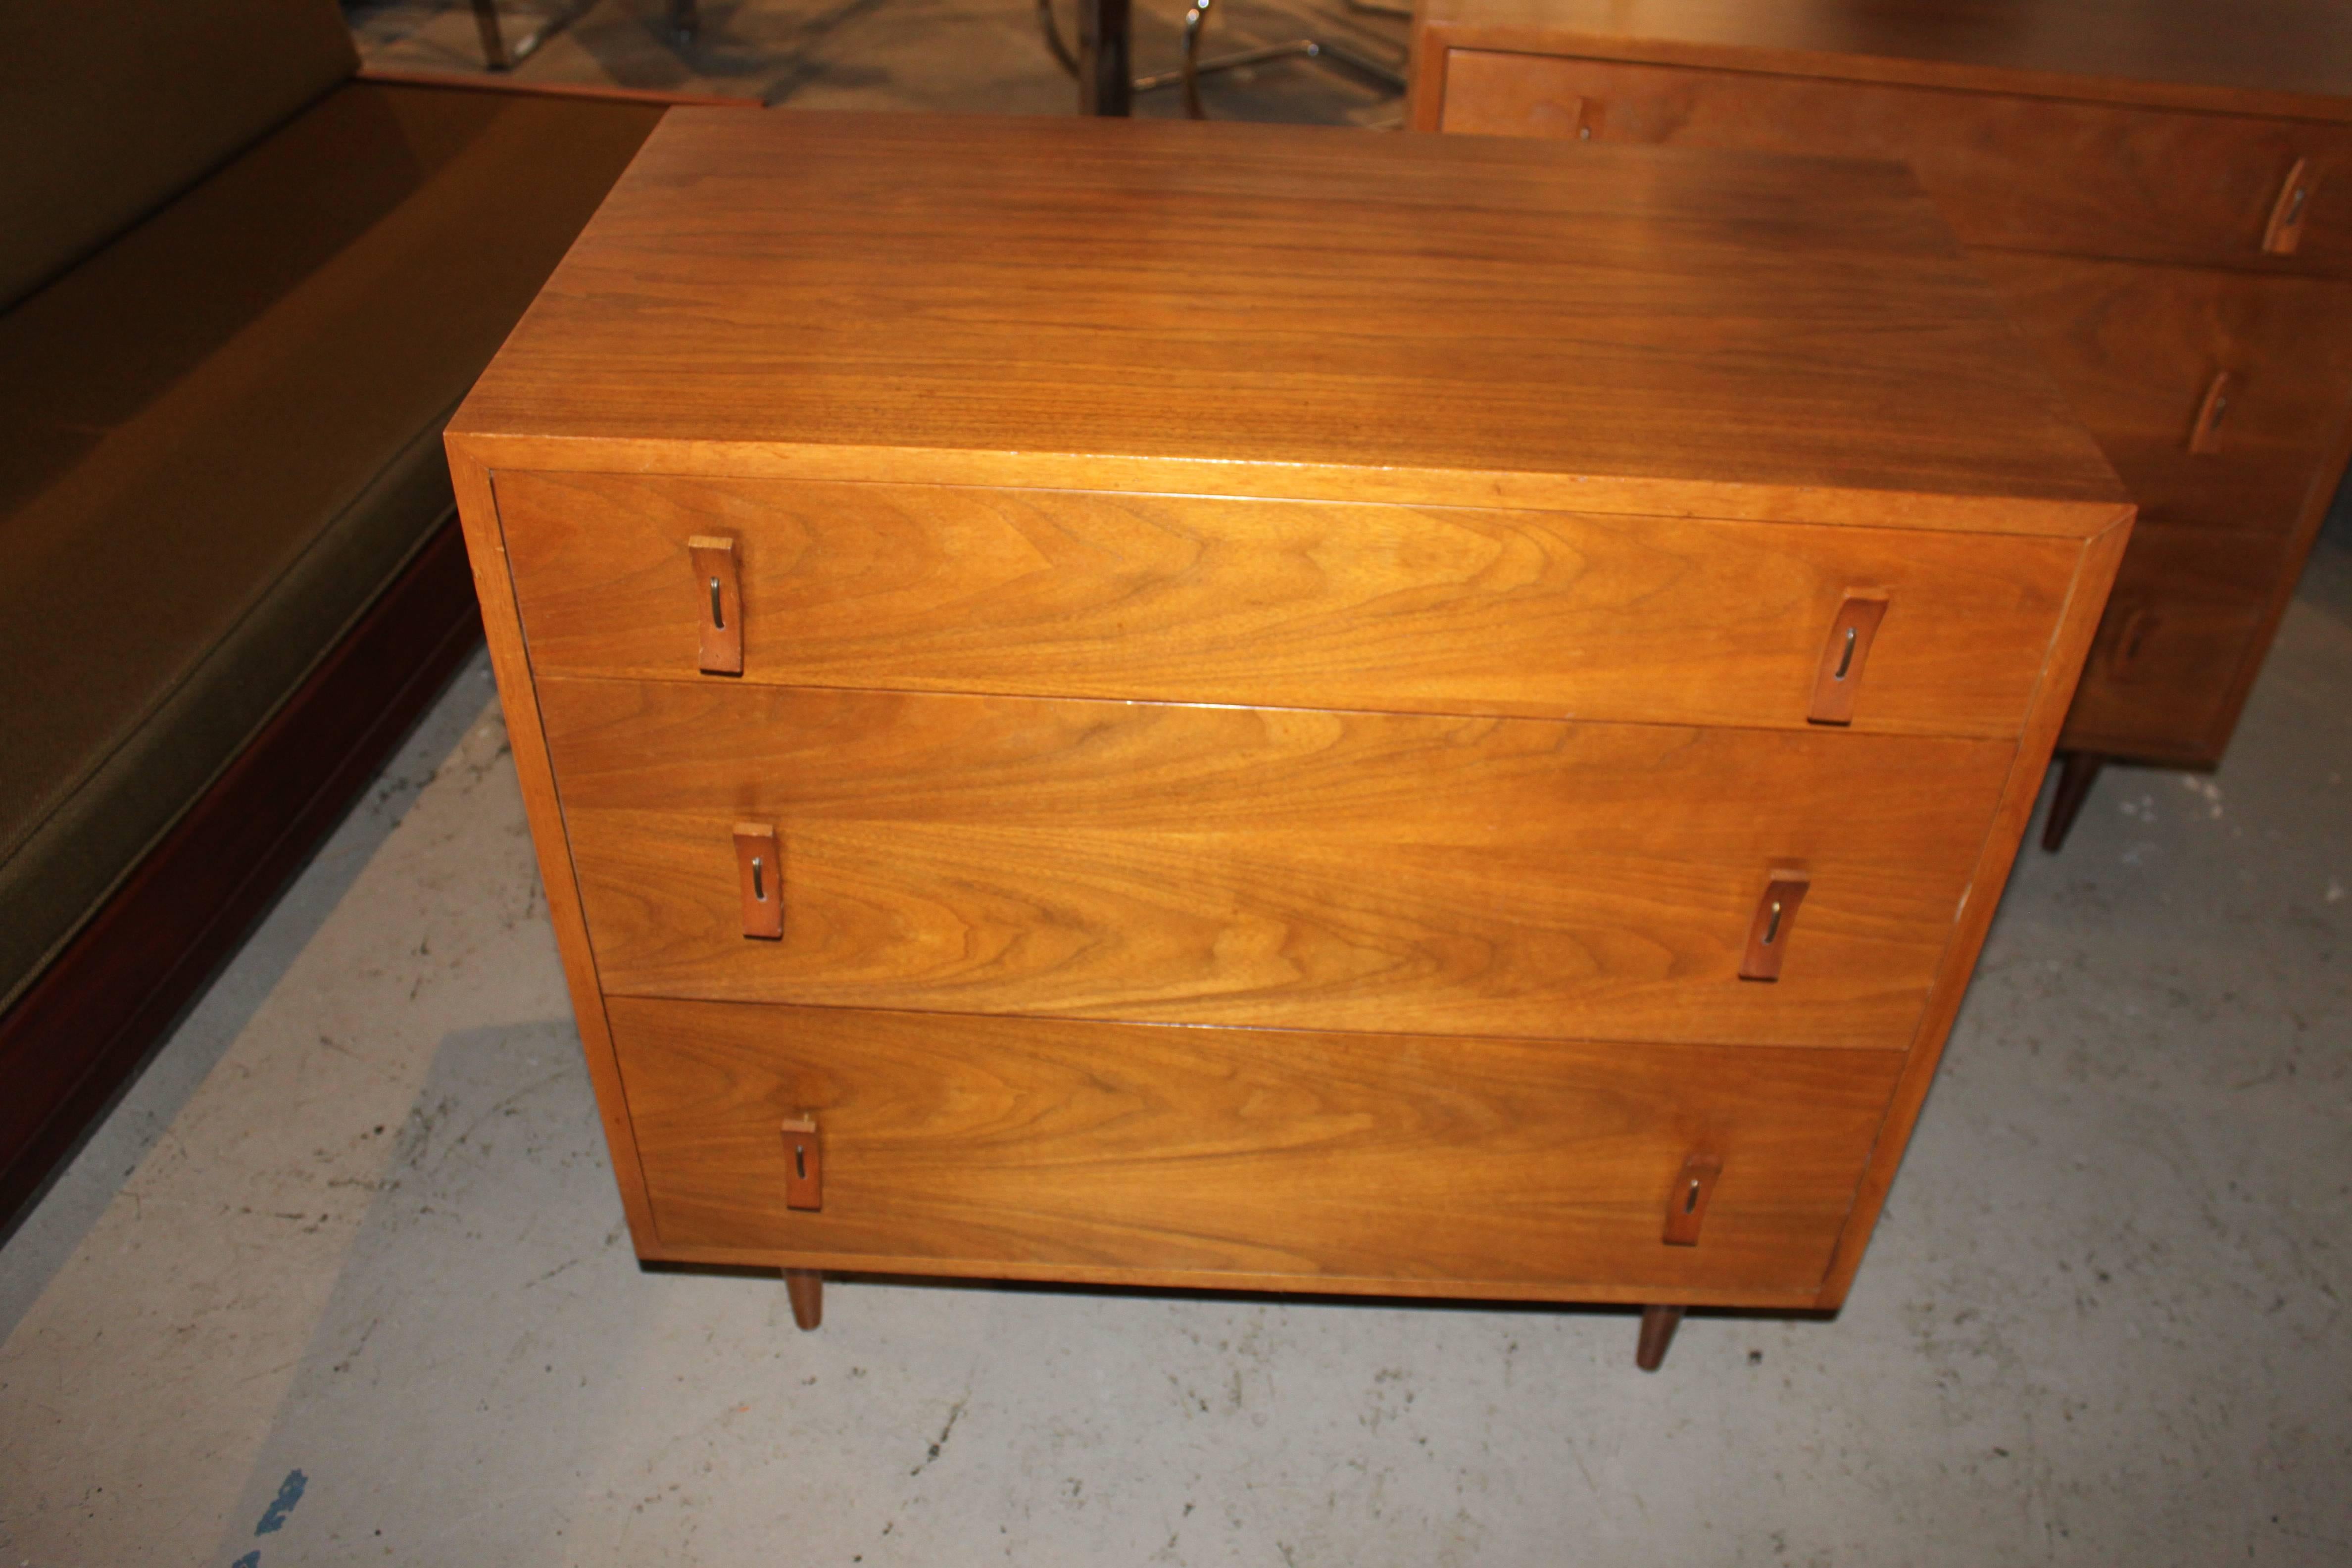 Pair of walnut dressers by Glenn of California. In very good condition with no major issues to mention.